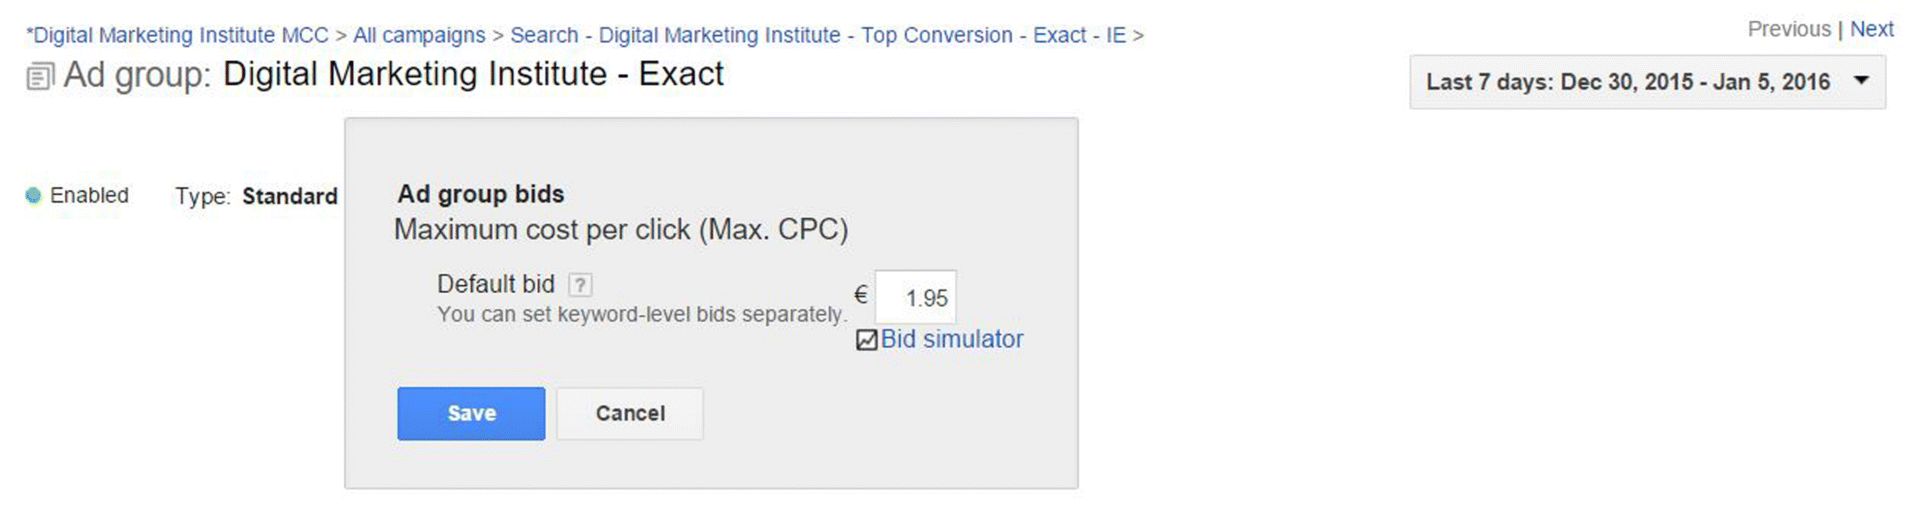 A screenshot image depicts setting bids from within an ad group